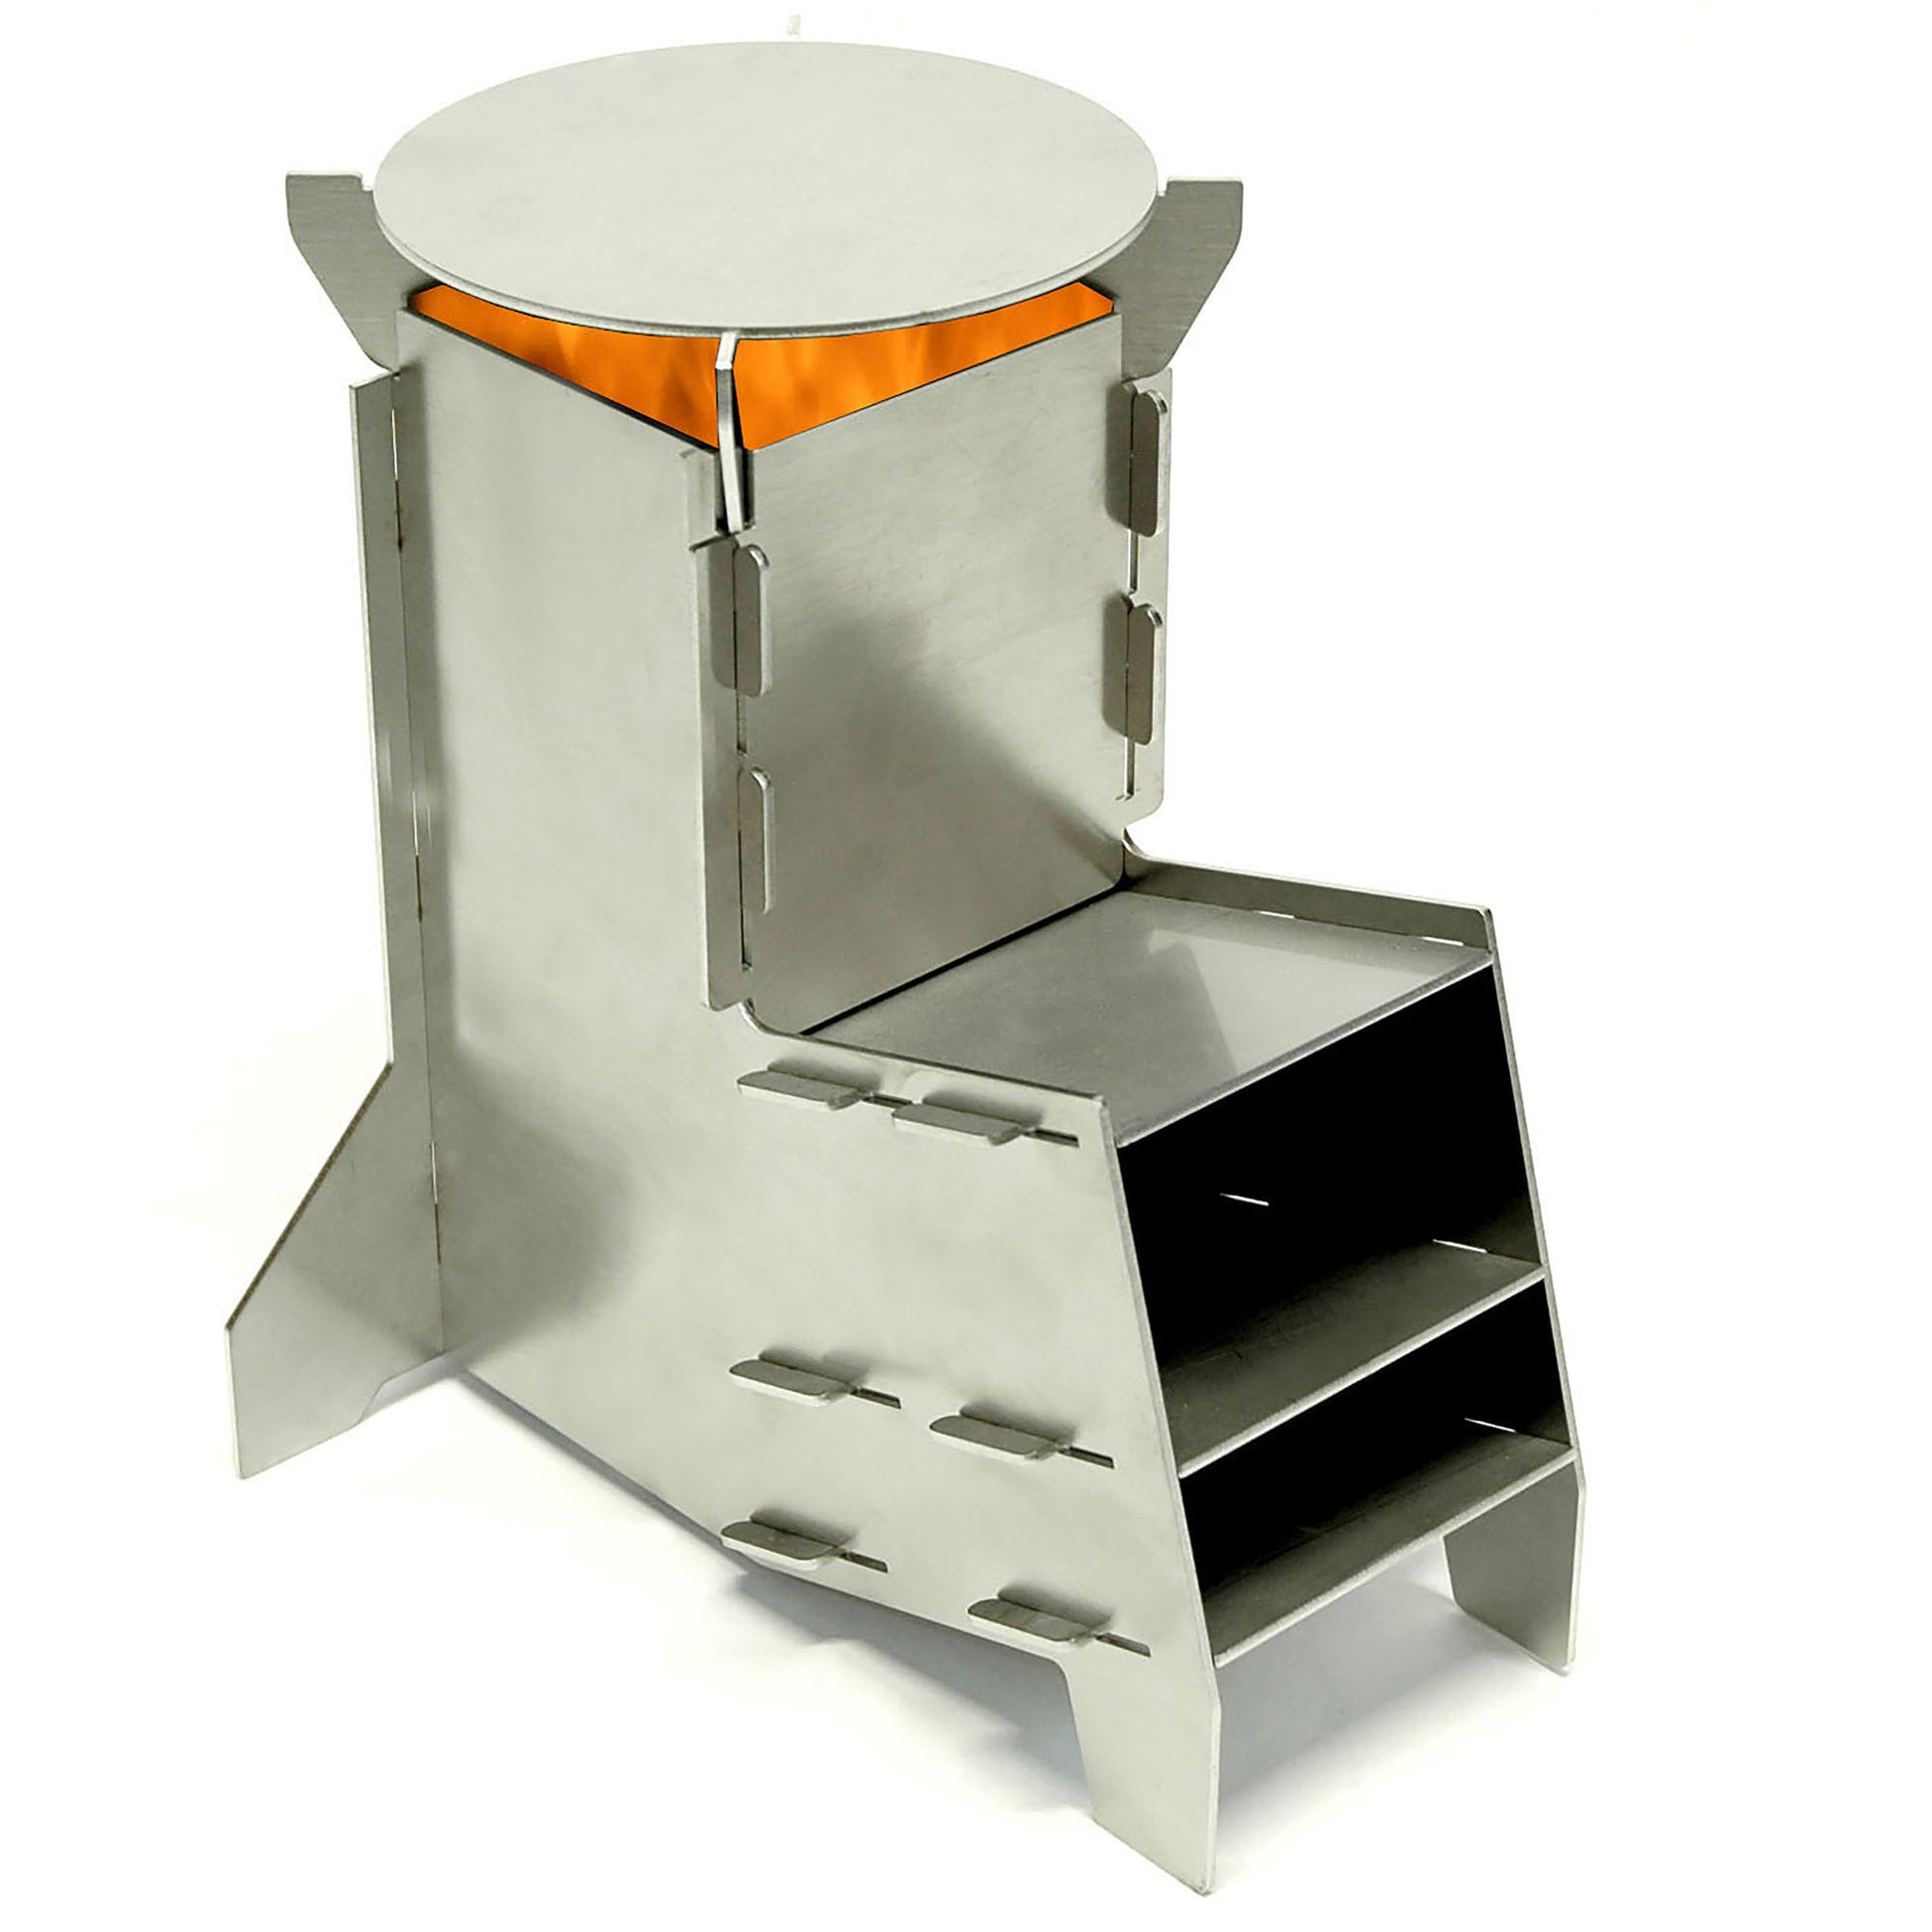 Stainless steel mini rocket stove packs flat for camping, hiking, or emergency